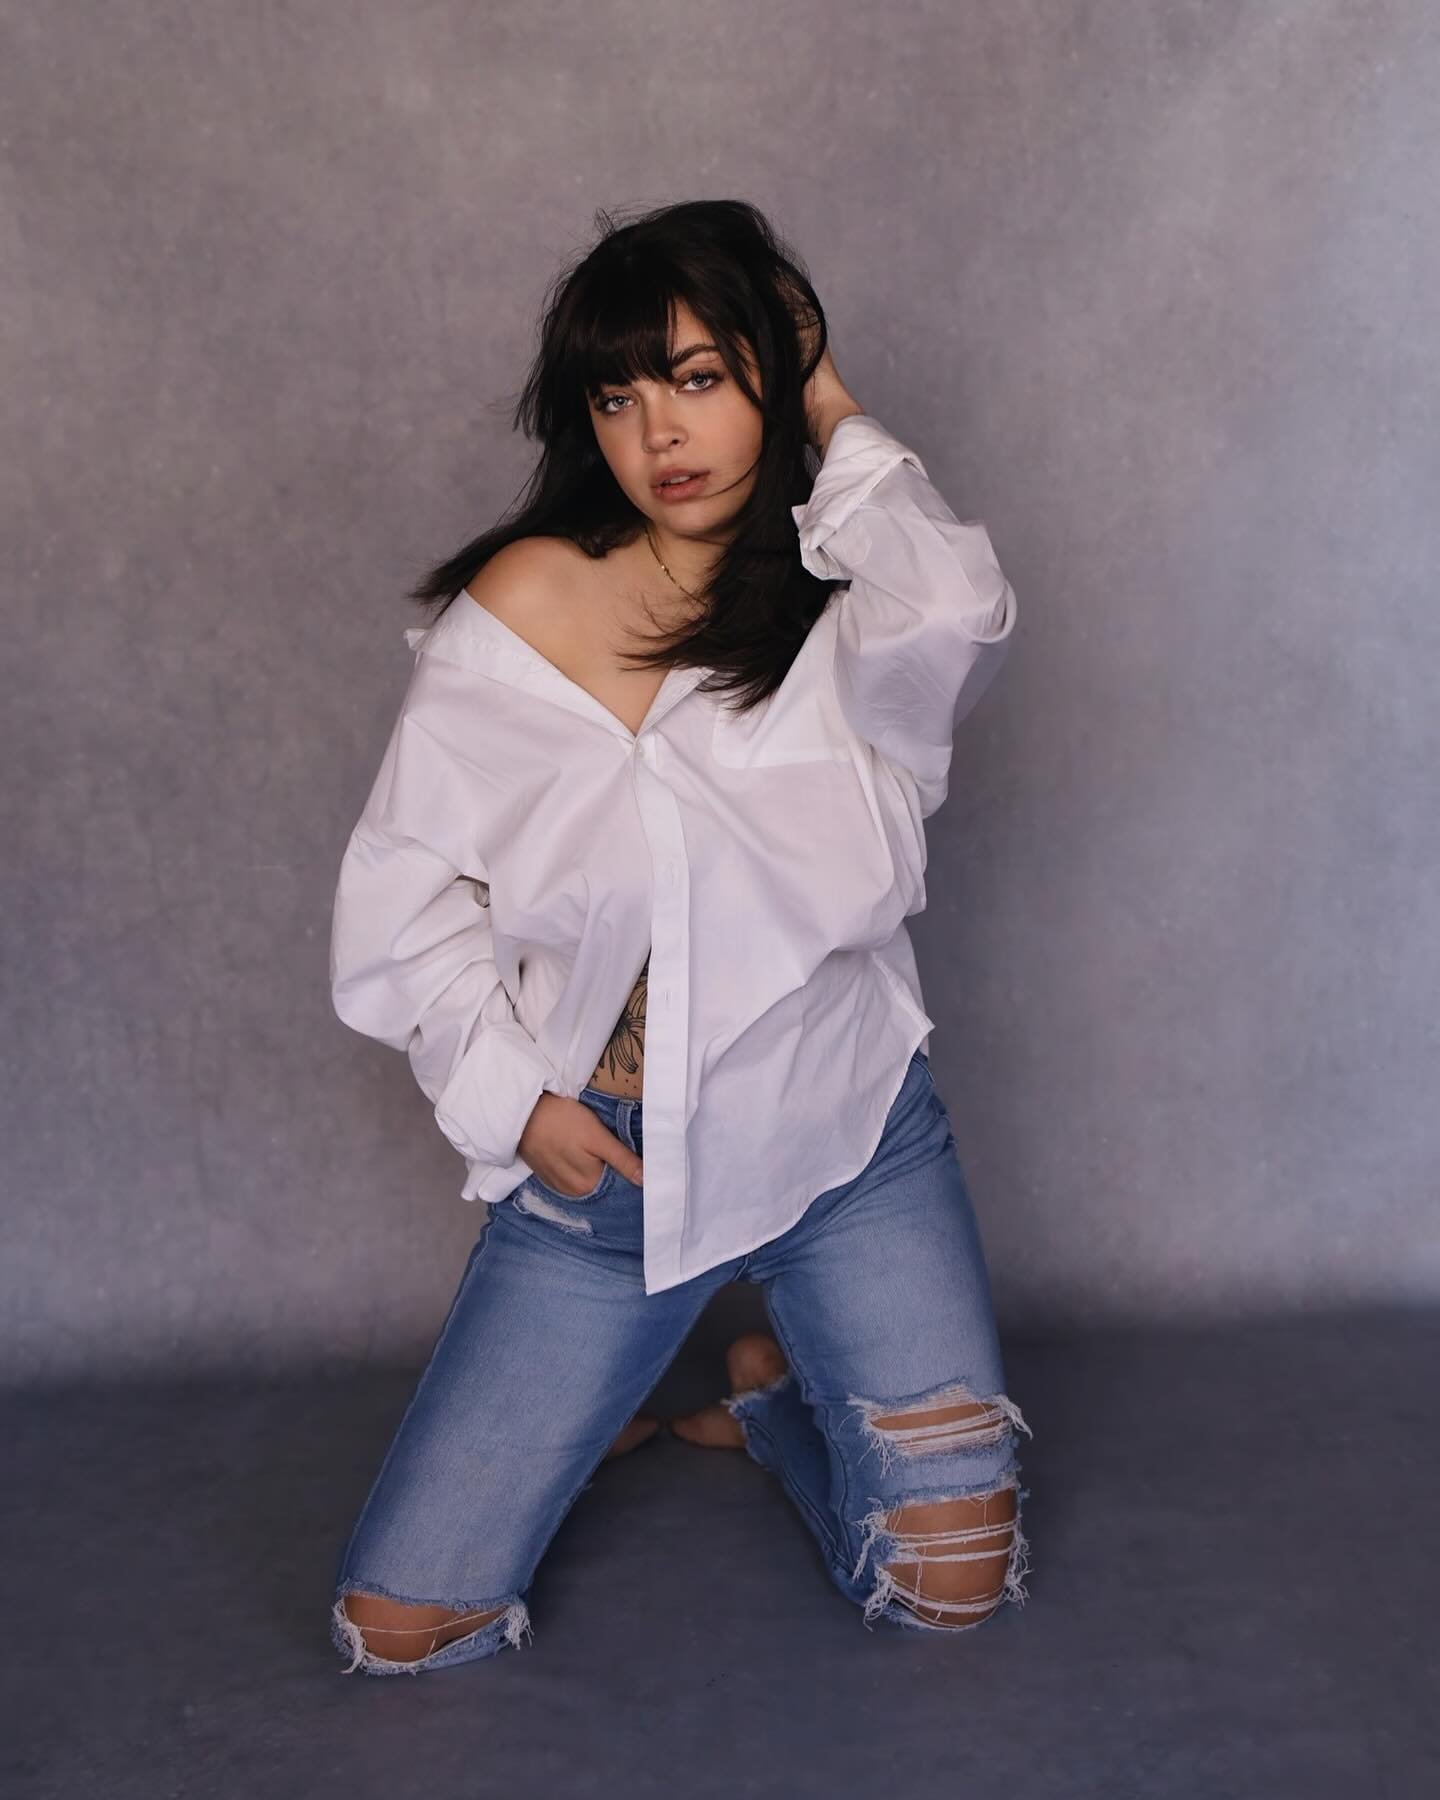 A button down and jeans will work - THANKS! 
.
.
#jeans #cute #whitebuttondown #photoshoot